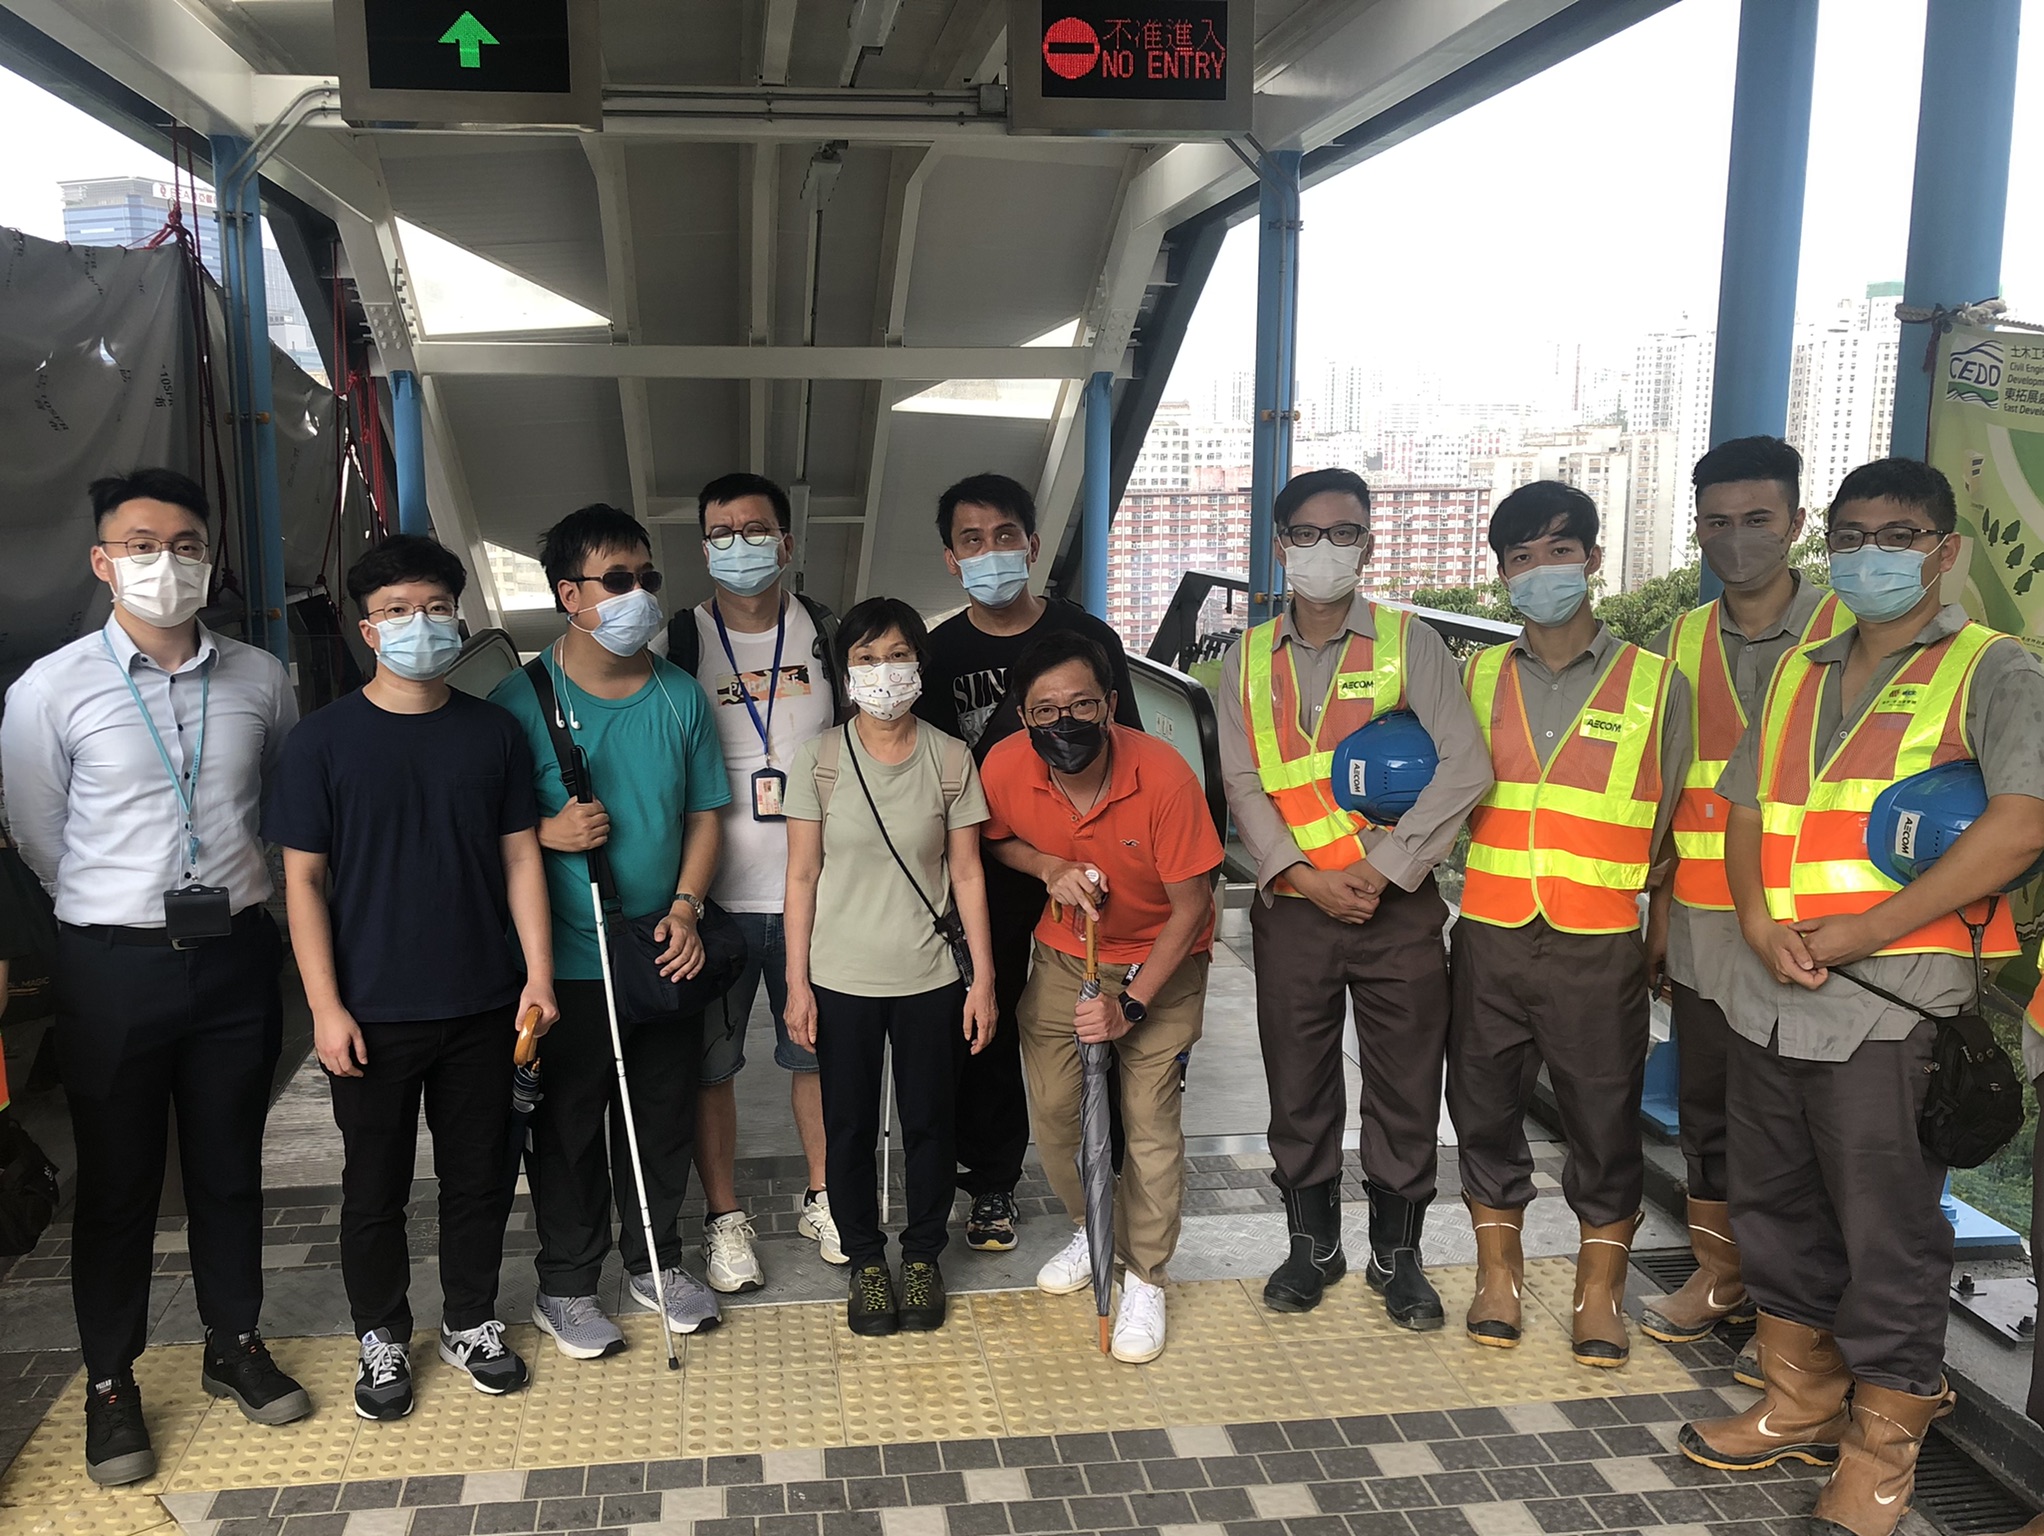 Representatives of associations for the visually impaired visited both of the escalators linking Hiu Kwong Street with Hiu Ming Street